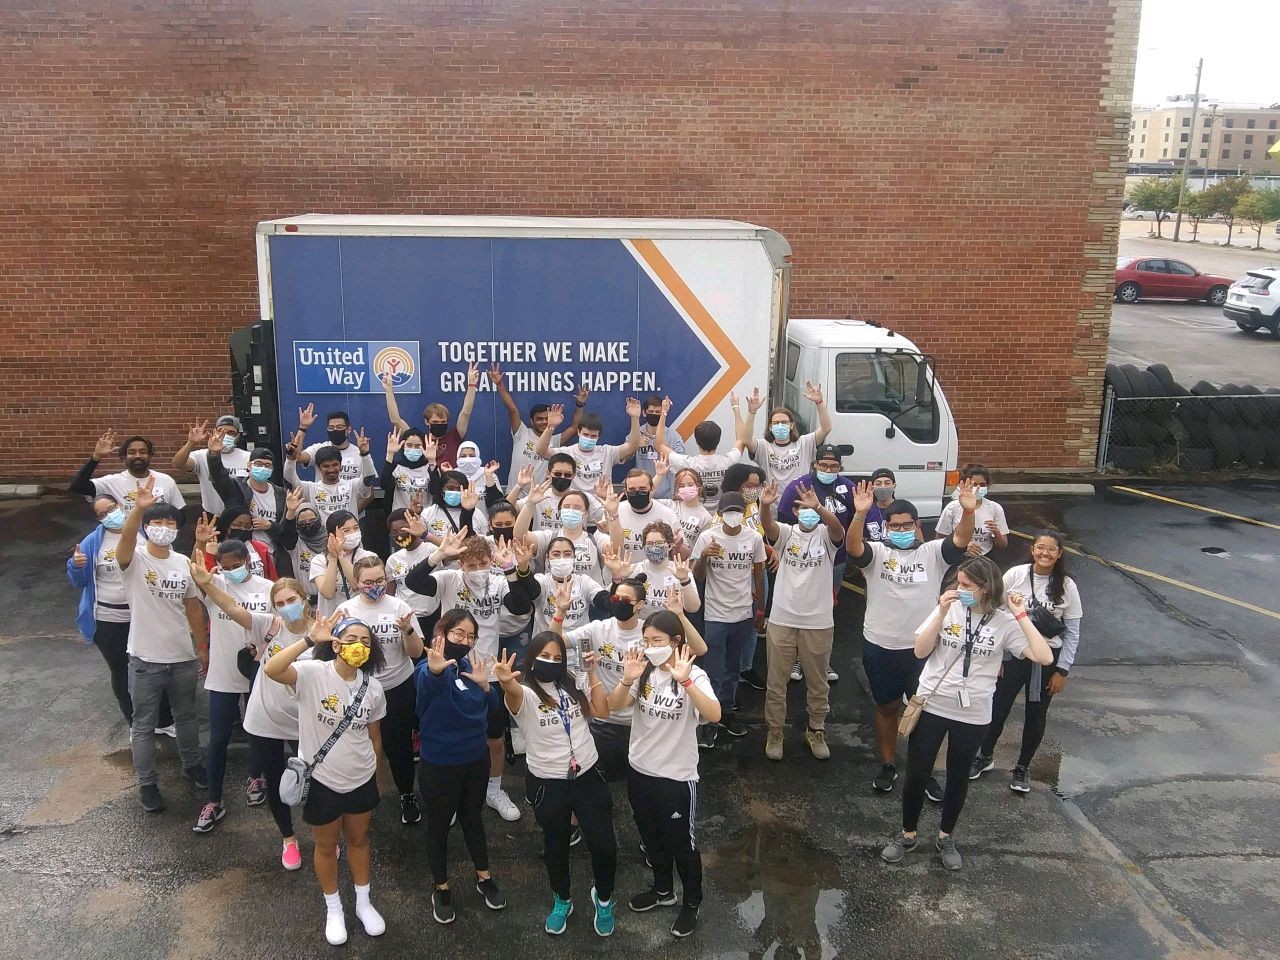 A large group of students smiling for the camera in front of a United Way truck